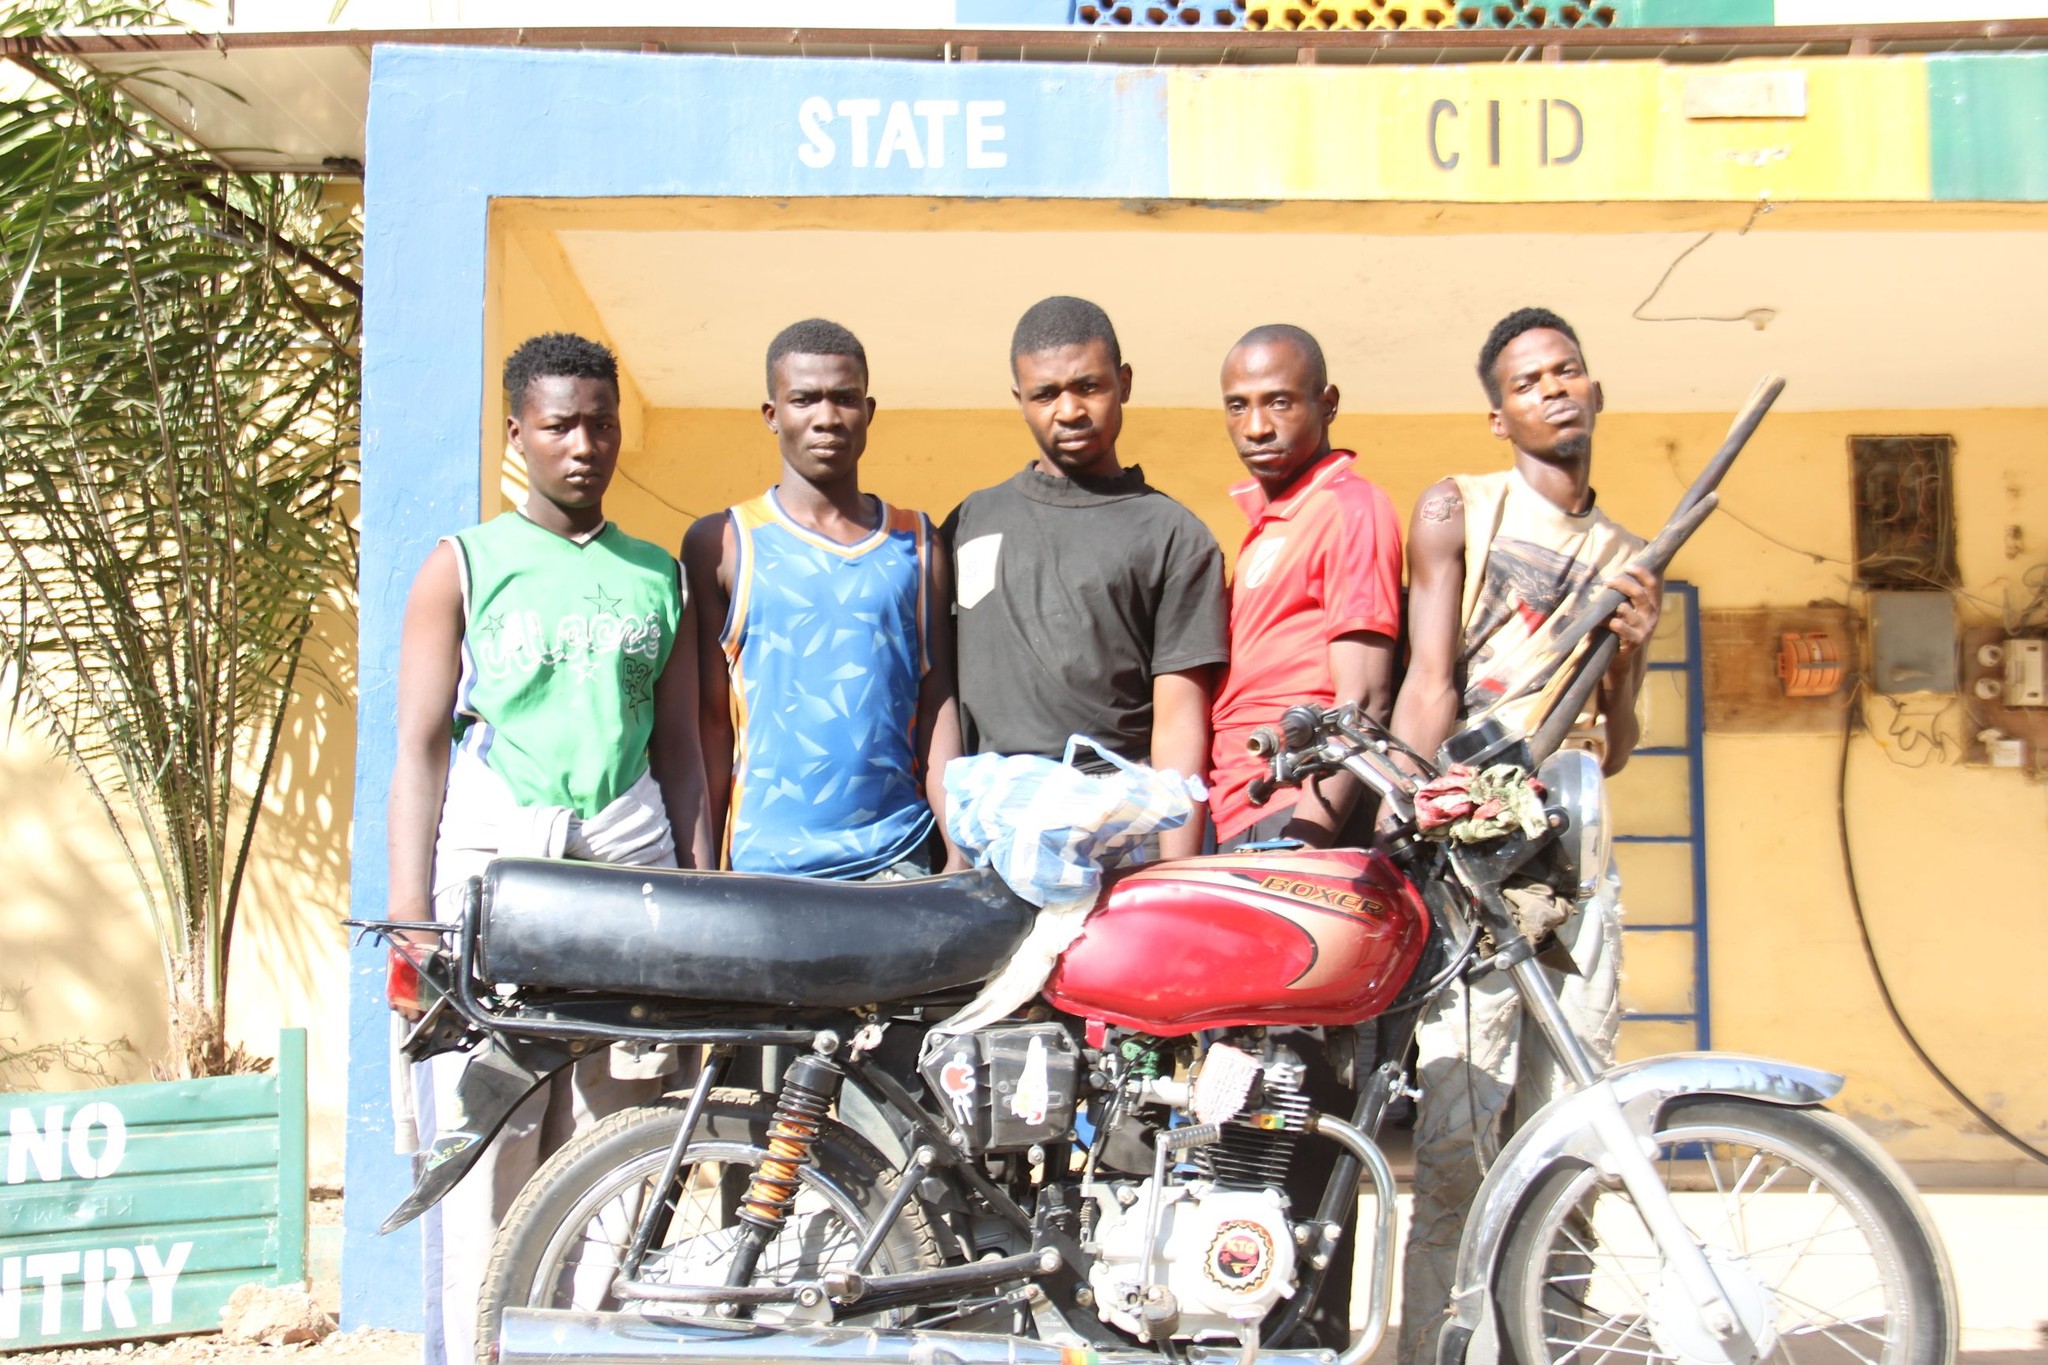 18-year-old girl, her boyfriend and three others arrested for armed robbery in Bauchi